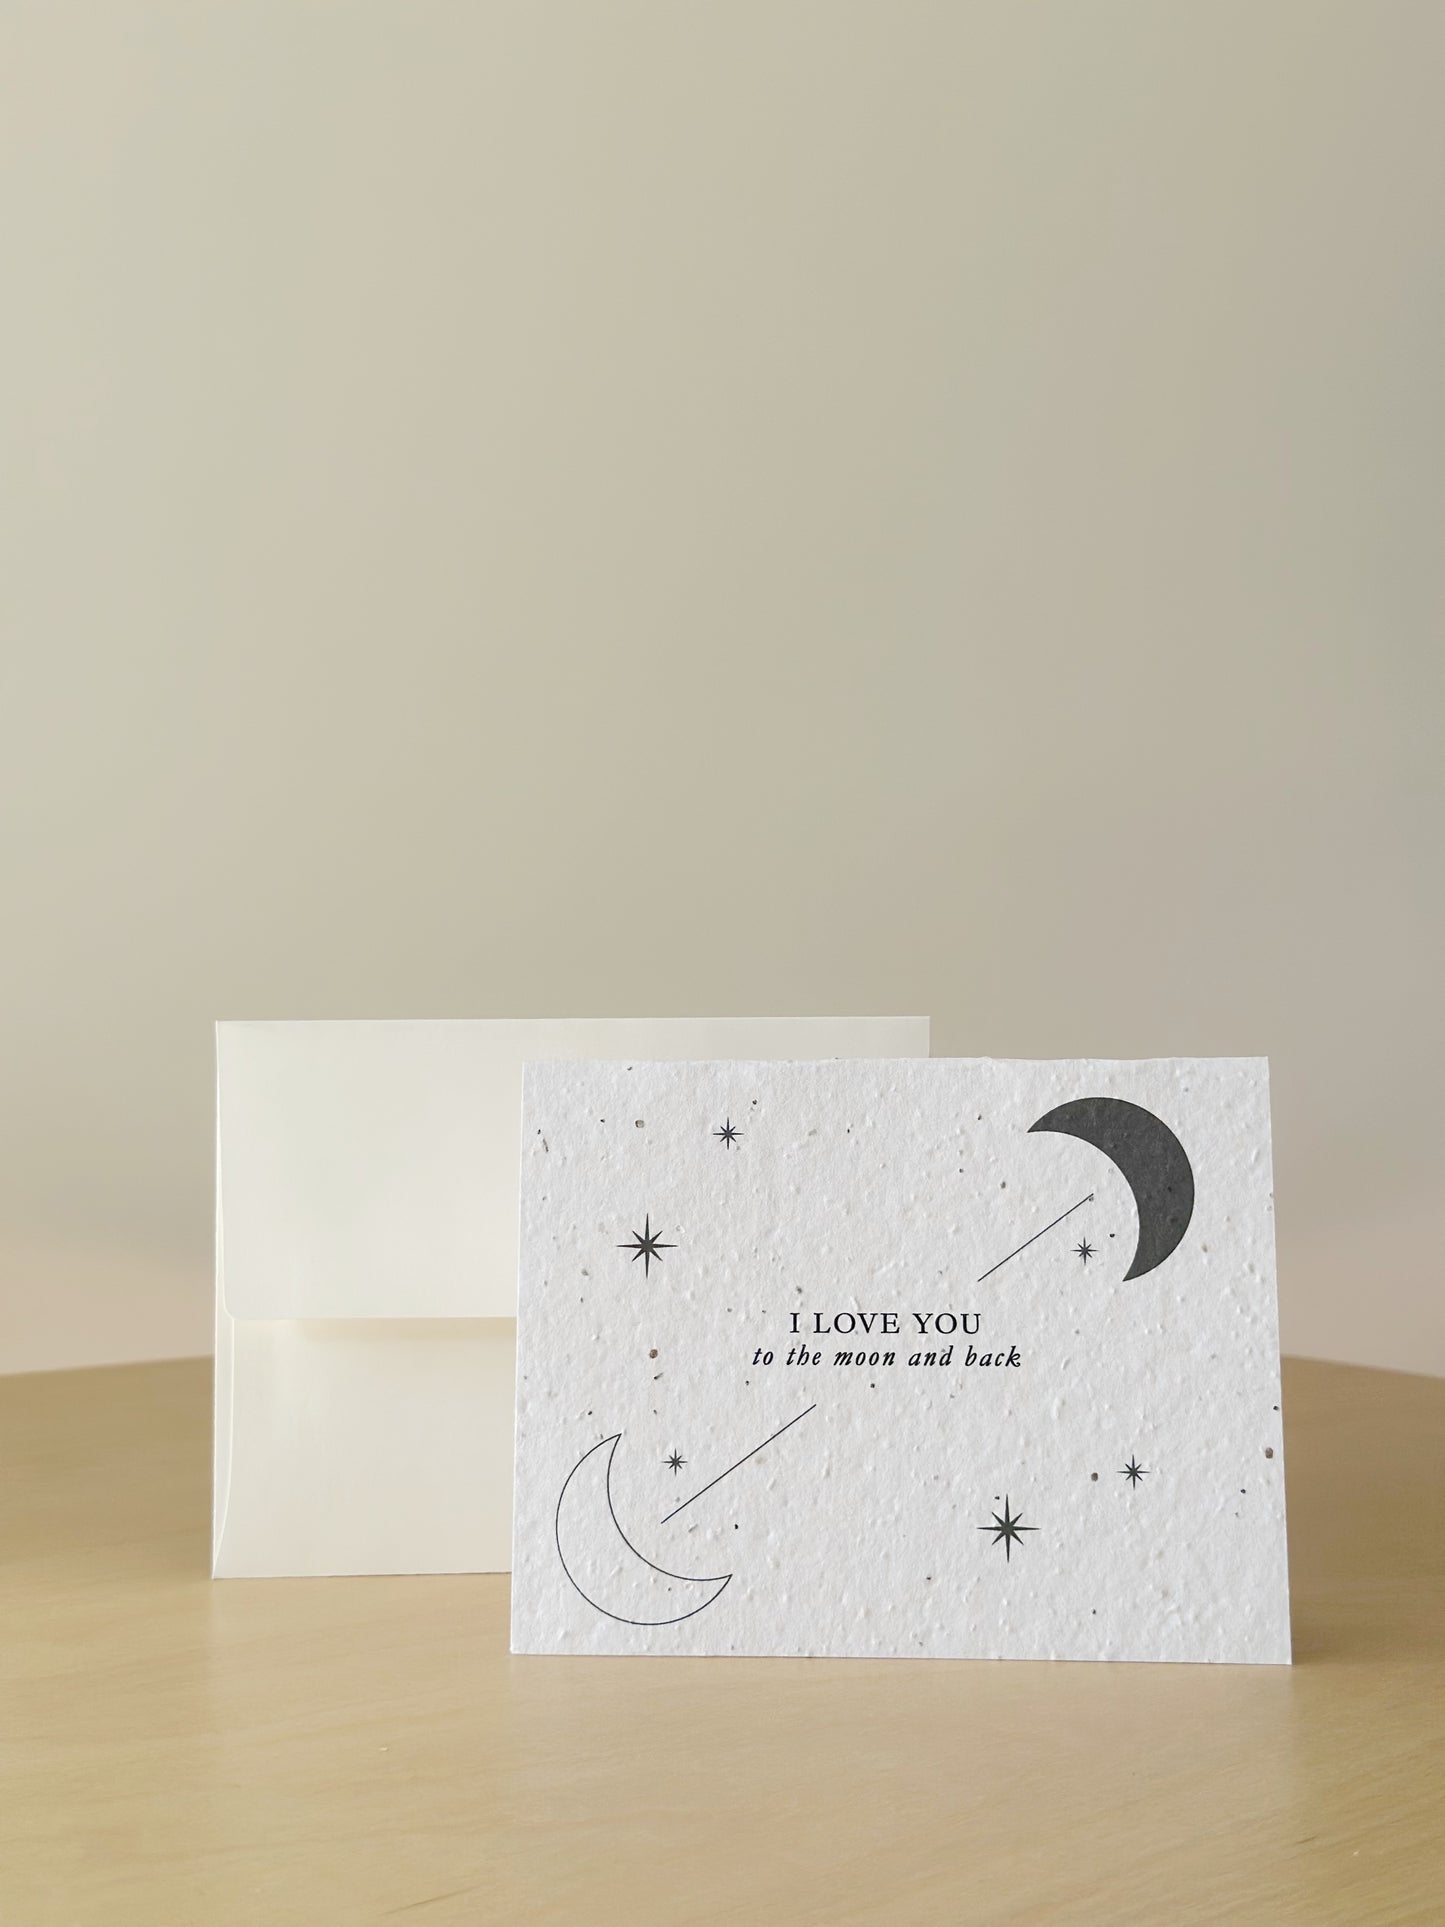 I Love You To The Moon & Back Greeting Card